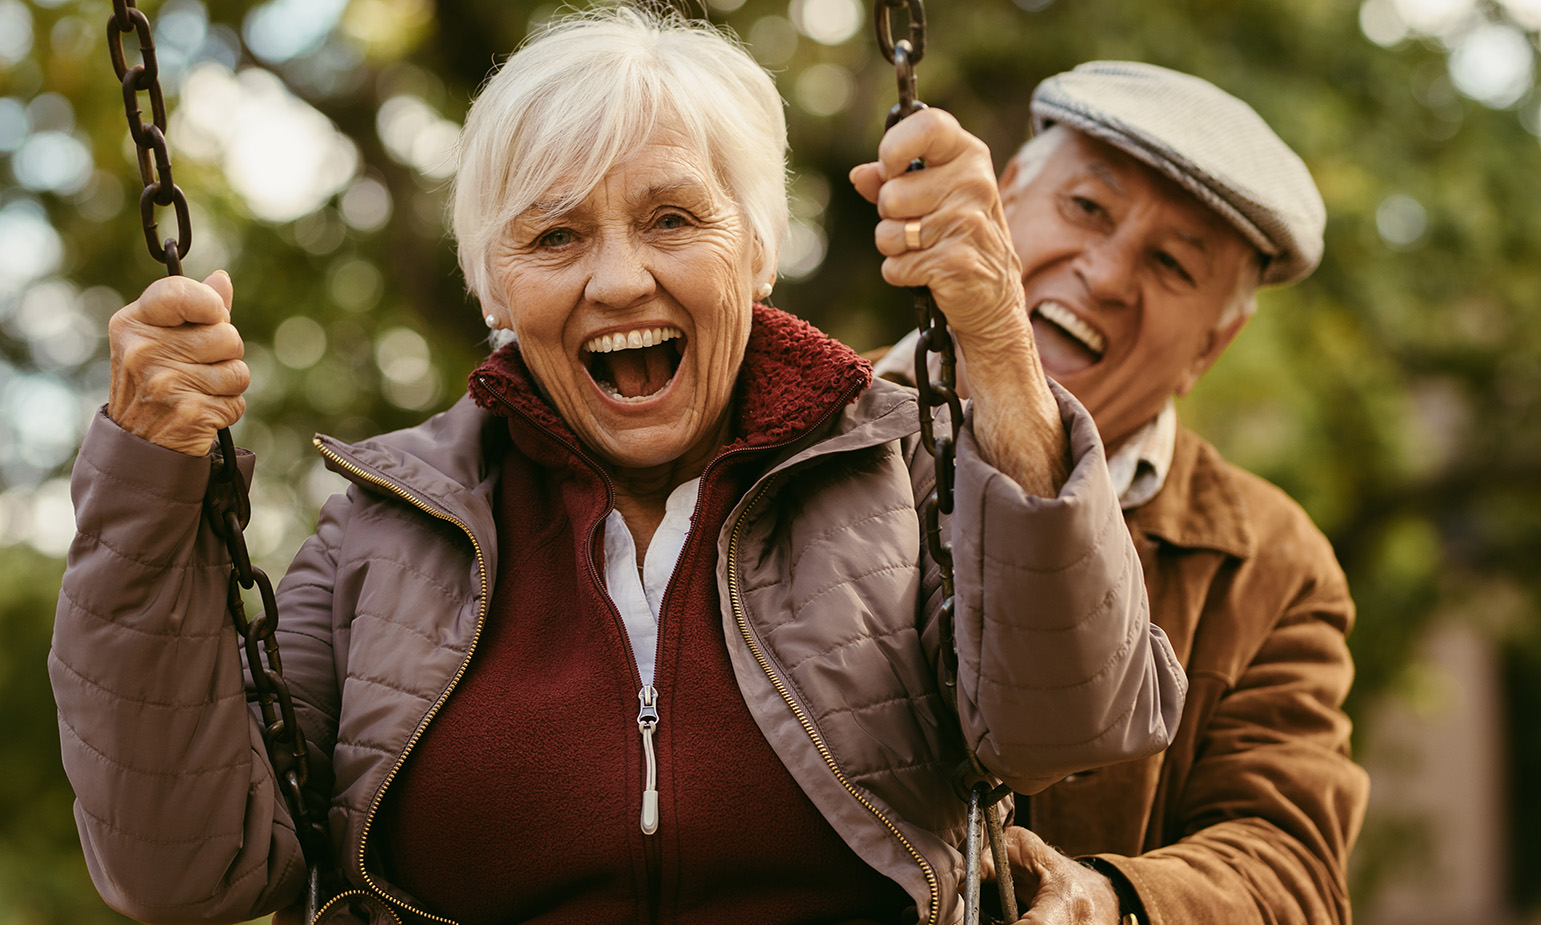 Elderly woman on playground swing, mouth agape in delight as husband gleefully guides swing from behind